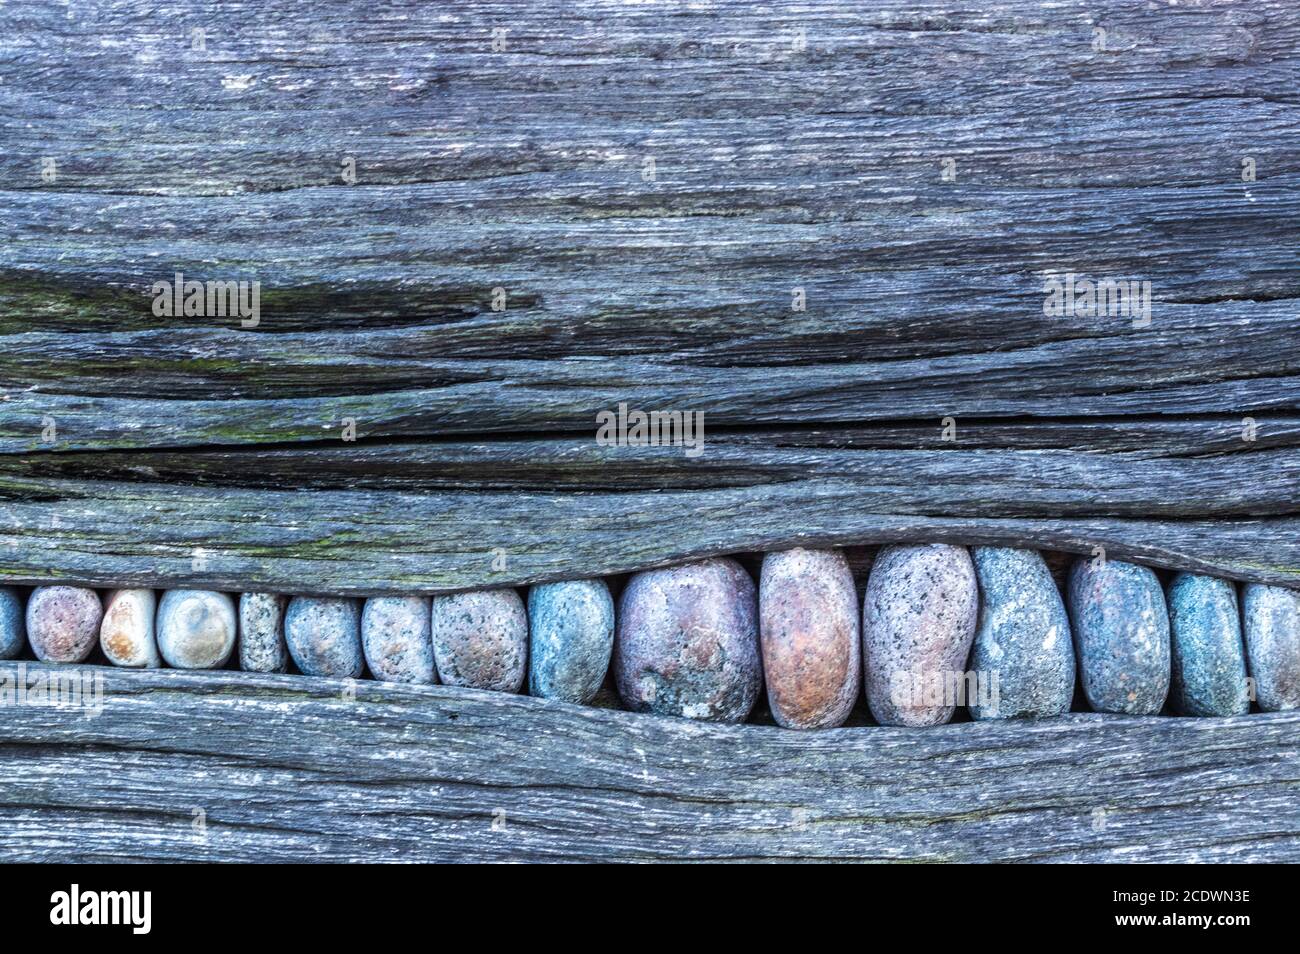 Art with wood and stones Stock Photo